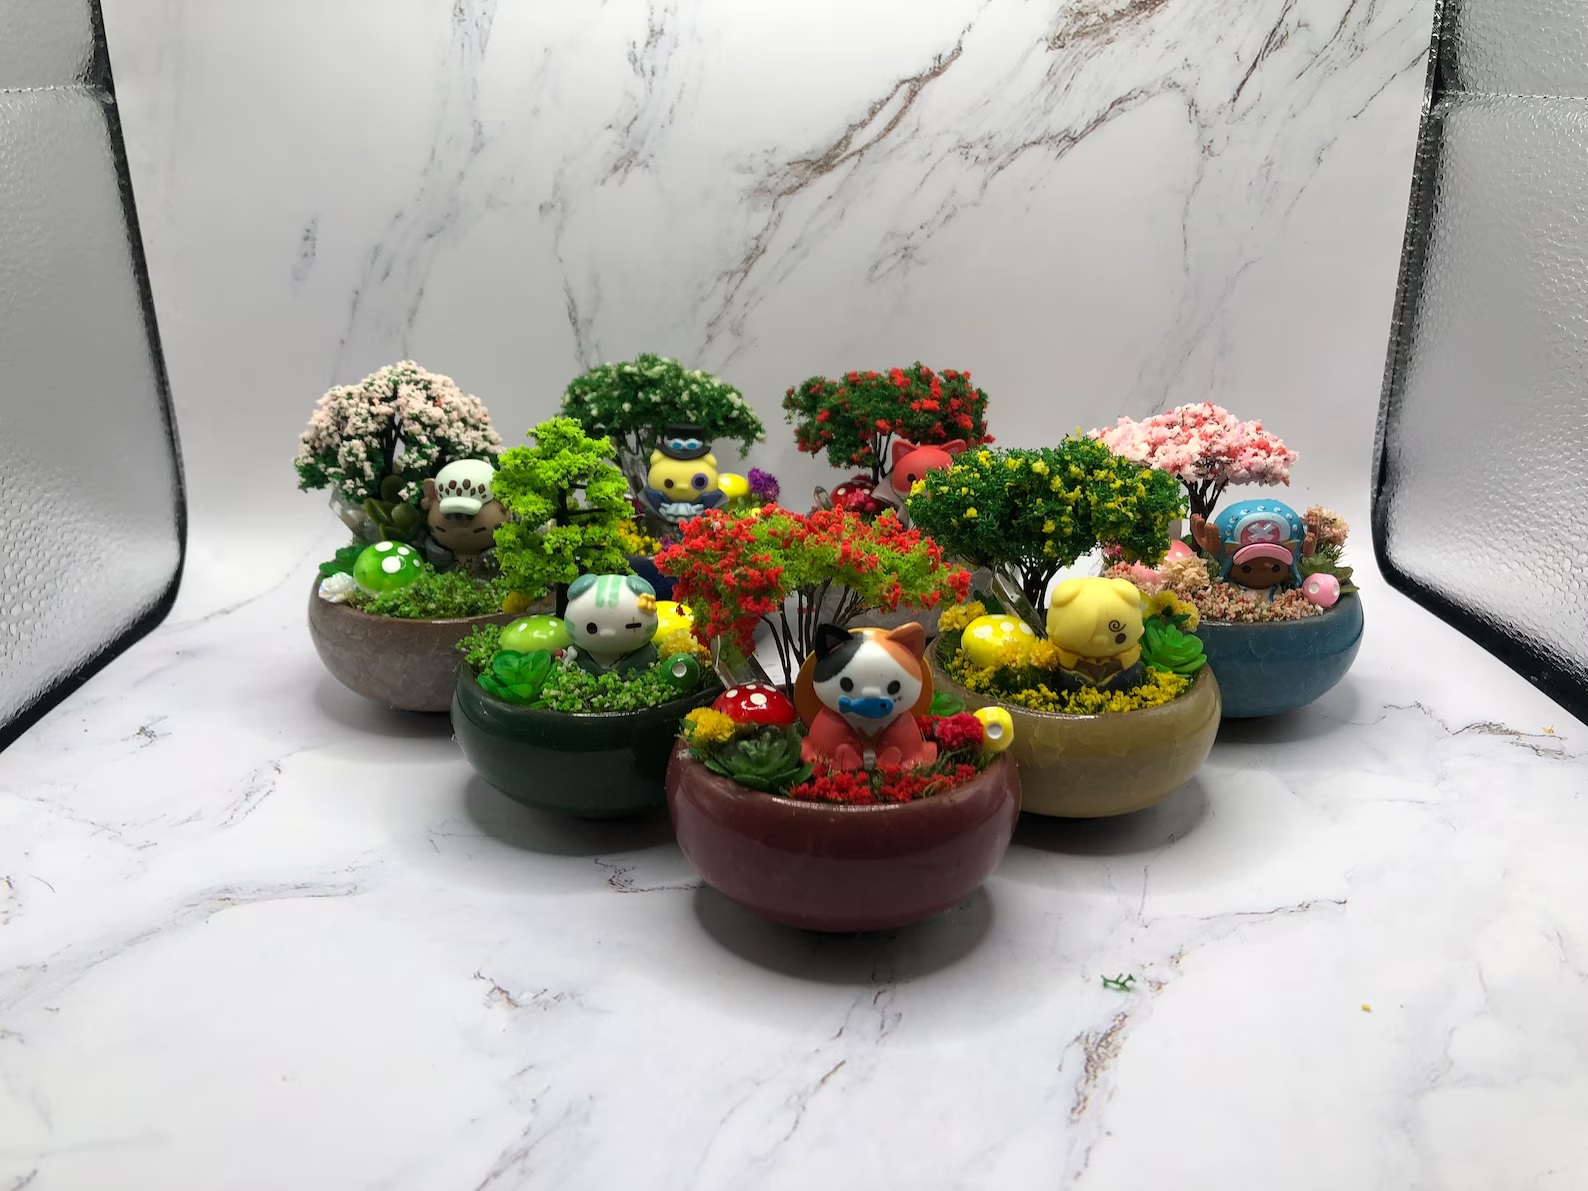 A grouping of small round pots, each a different color and containing different colored plants and kittens that reflect a different One Piece character